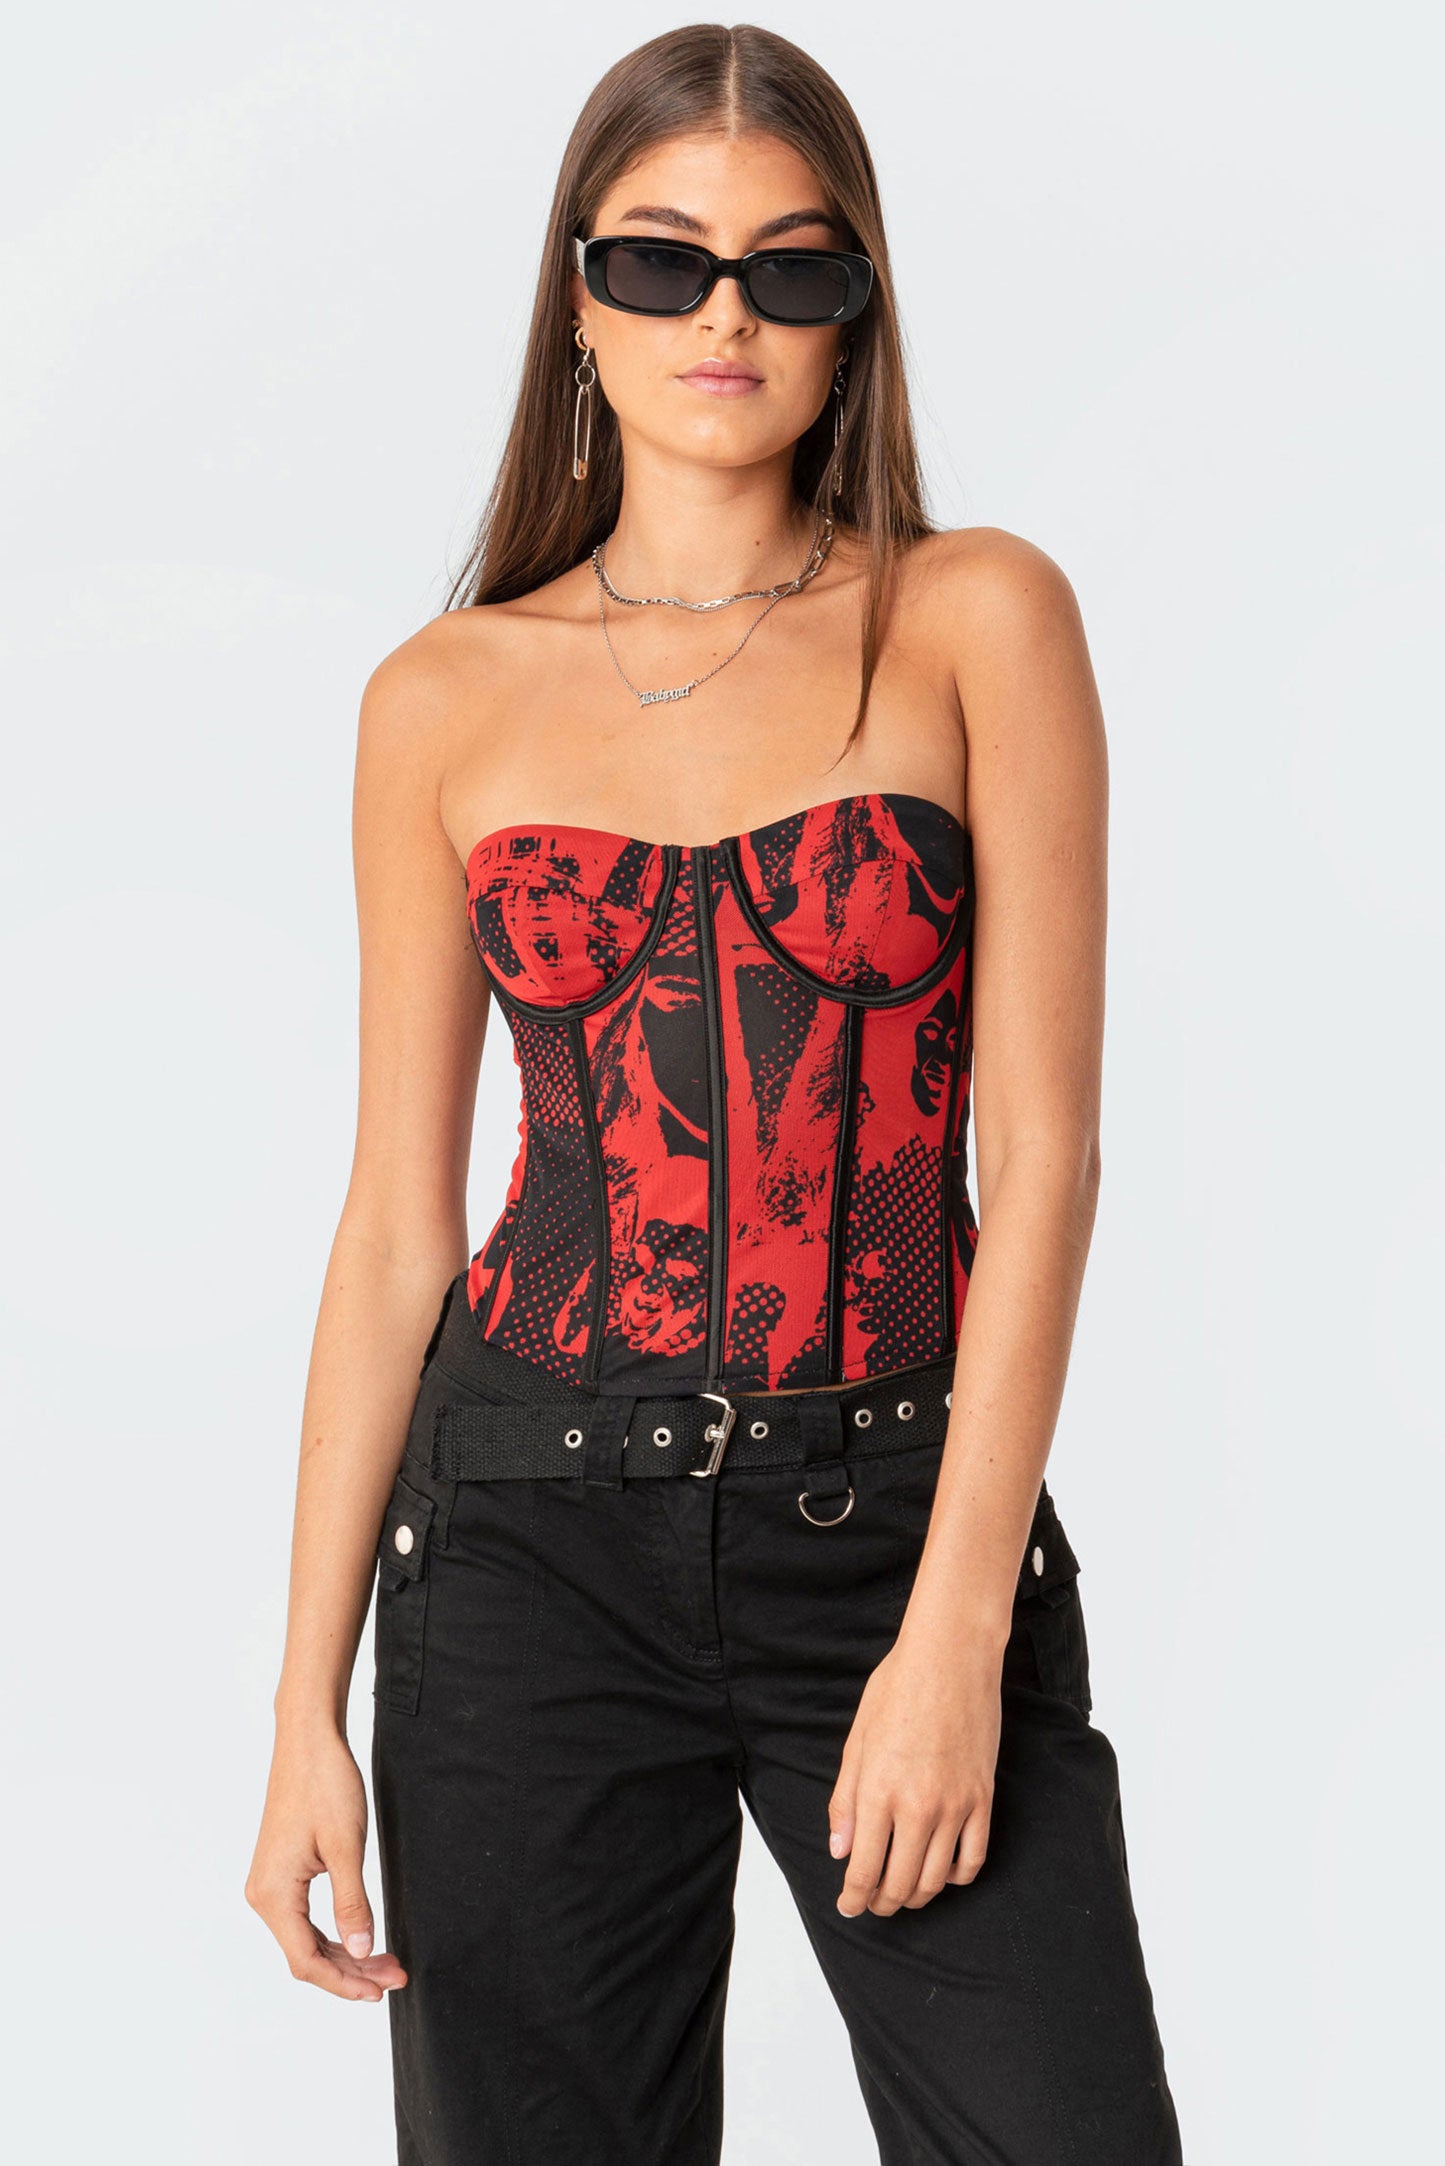 Missguided Red Bandage Ribbed Bralet - ShopStyle Bras  Mini skirts, Two  piece dress, Matching top and skirt